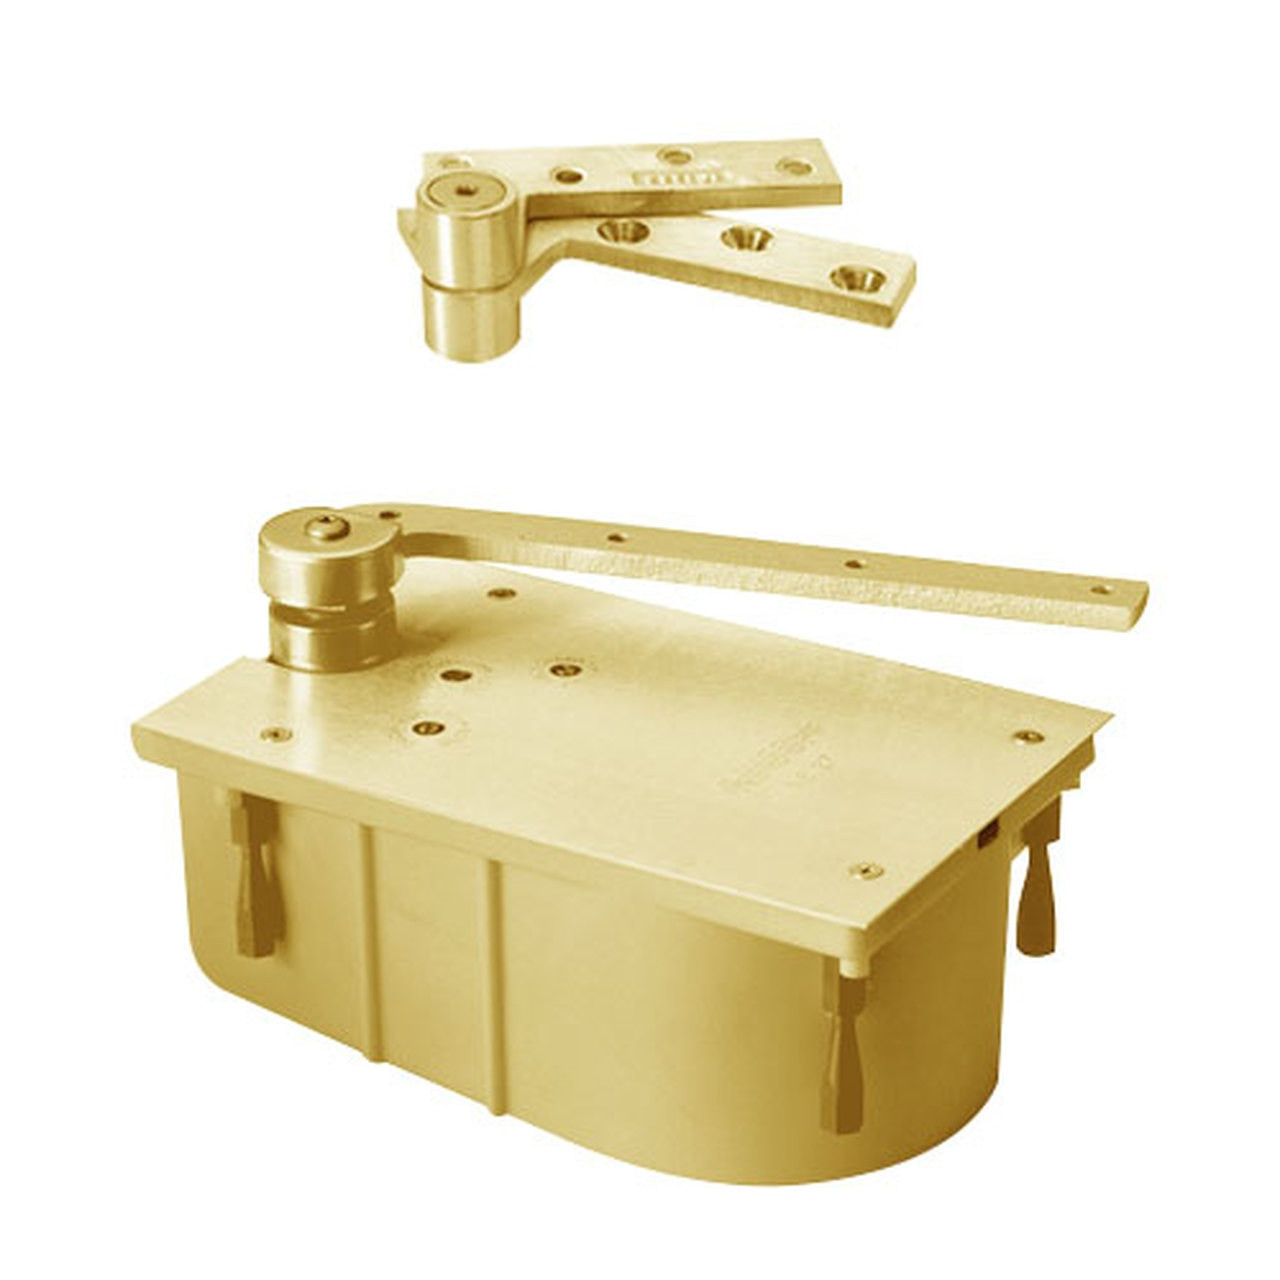 SCF127-95N-RH-606 Rixson 27 Series Fire Rated Heavy Duty 3/4" Offset Hung Floor Closer in Satin Brass Finish